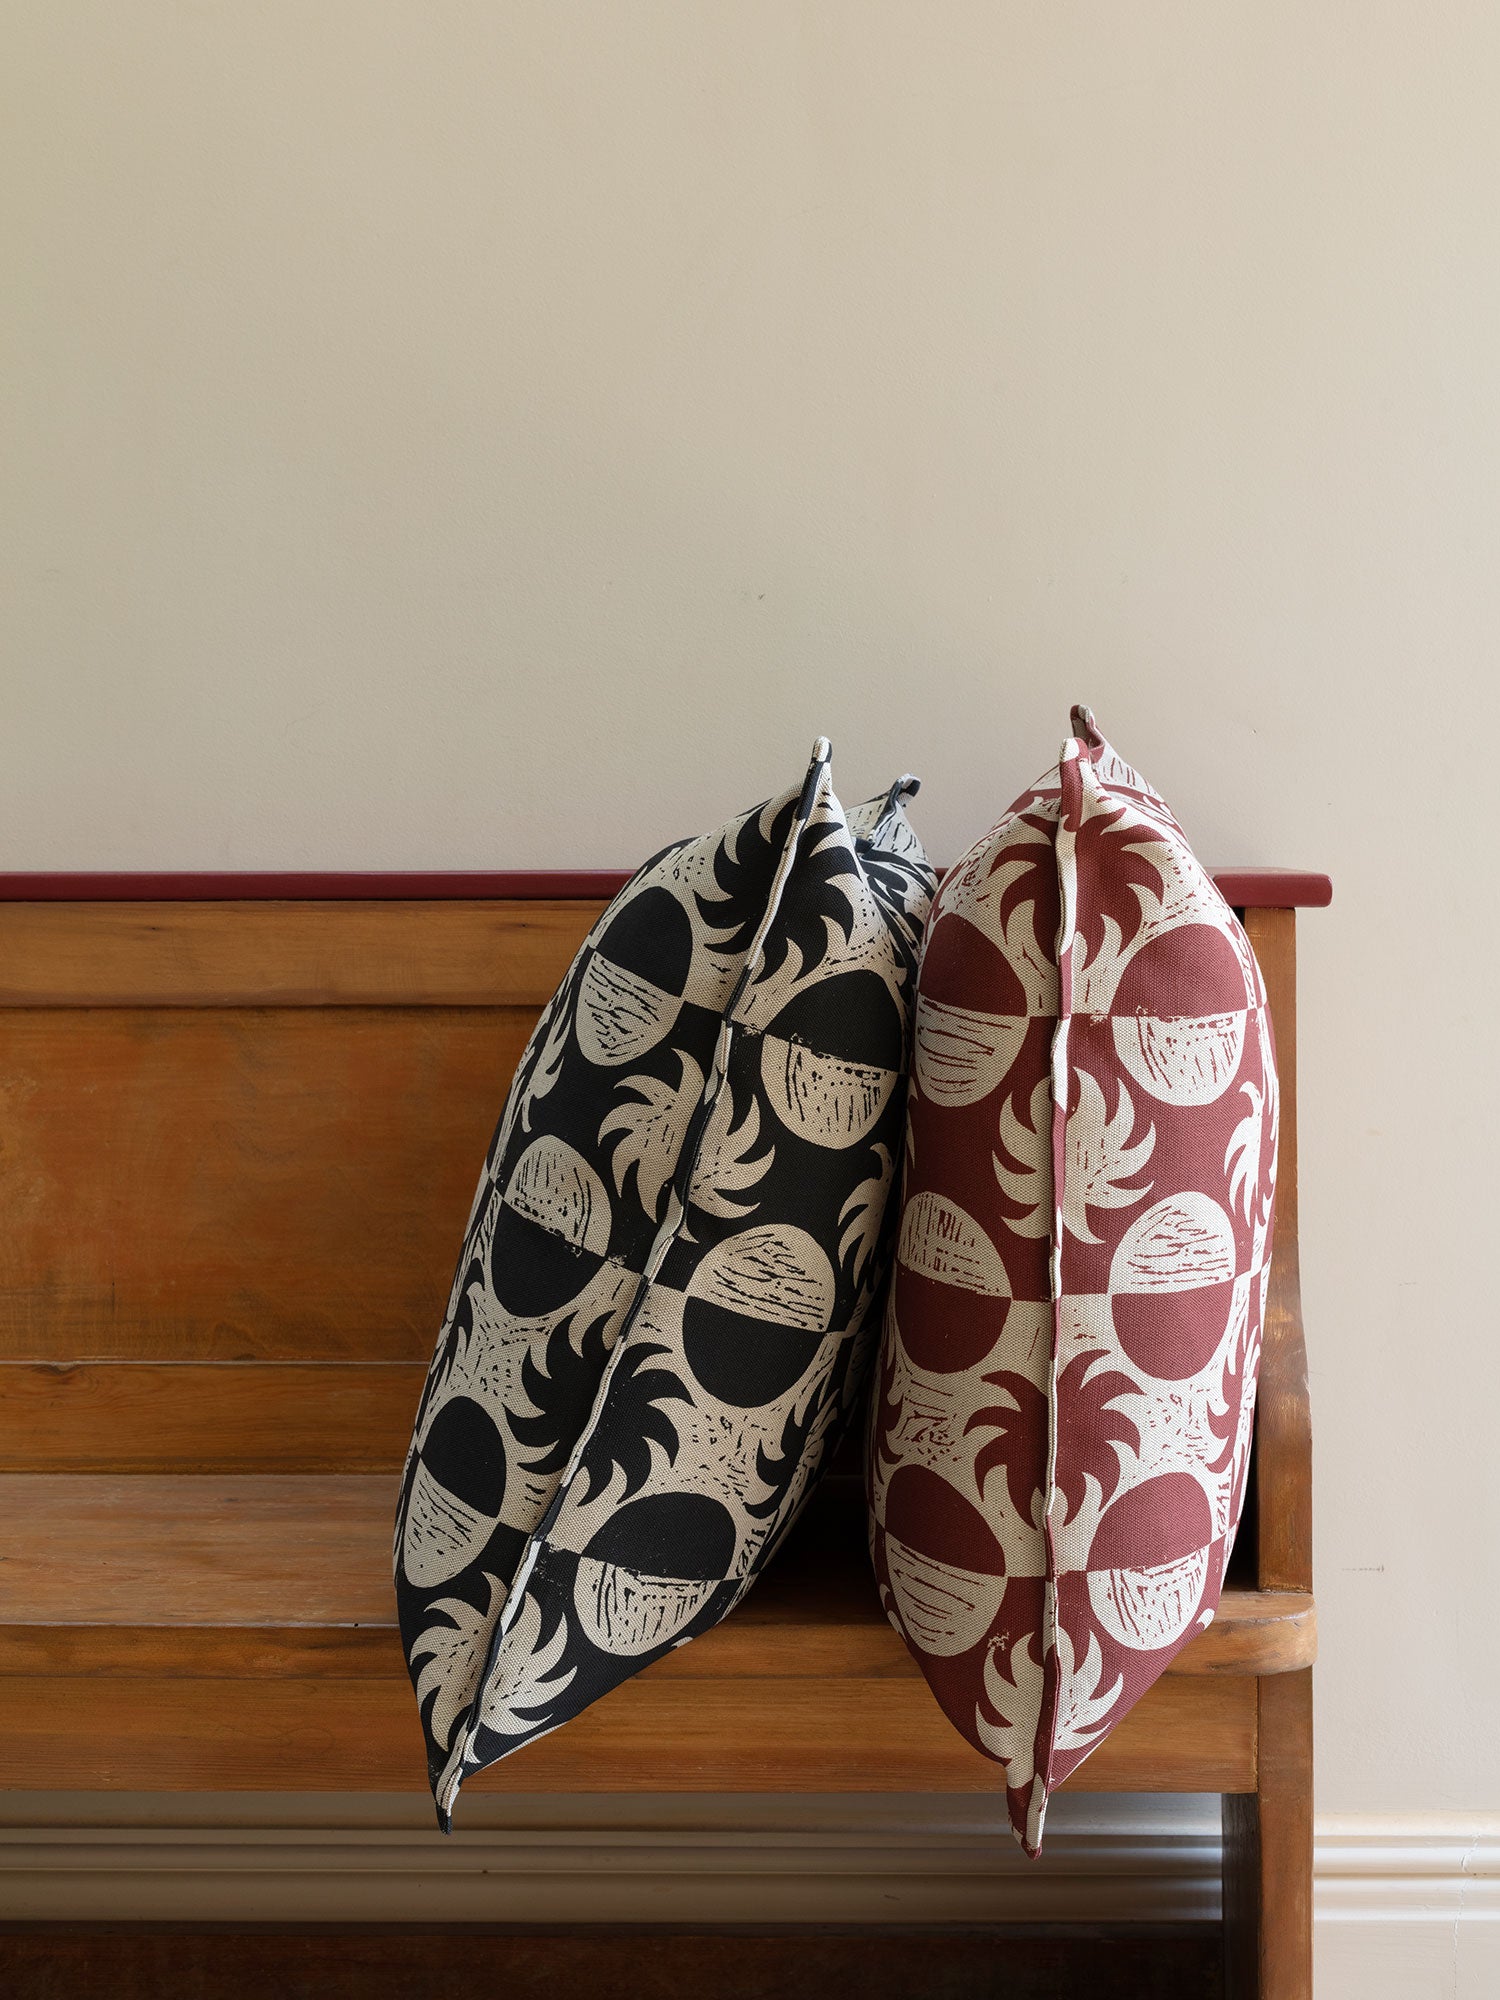 Cushions with red and white, and black and white sun and moon print fabric on wood bench